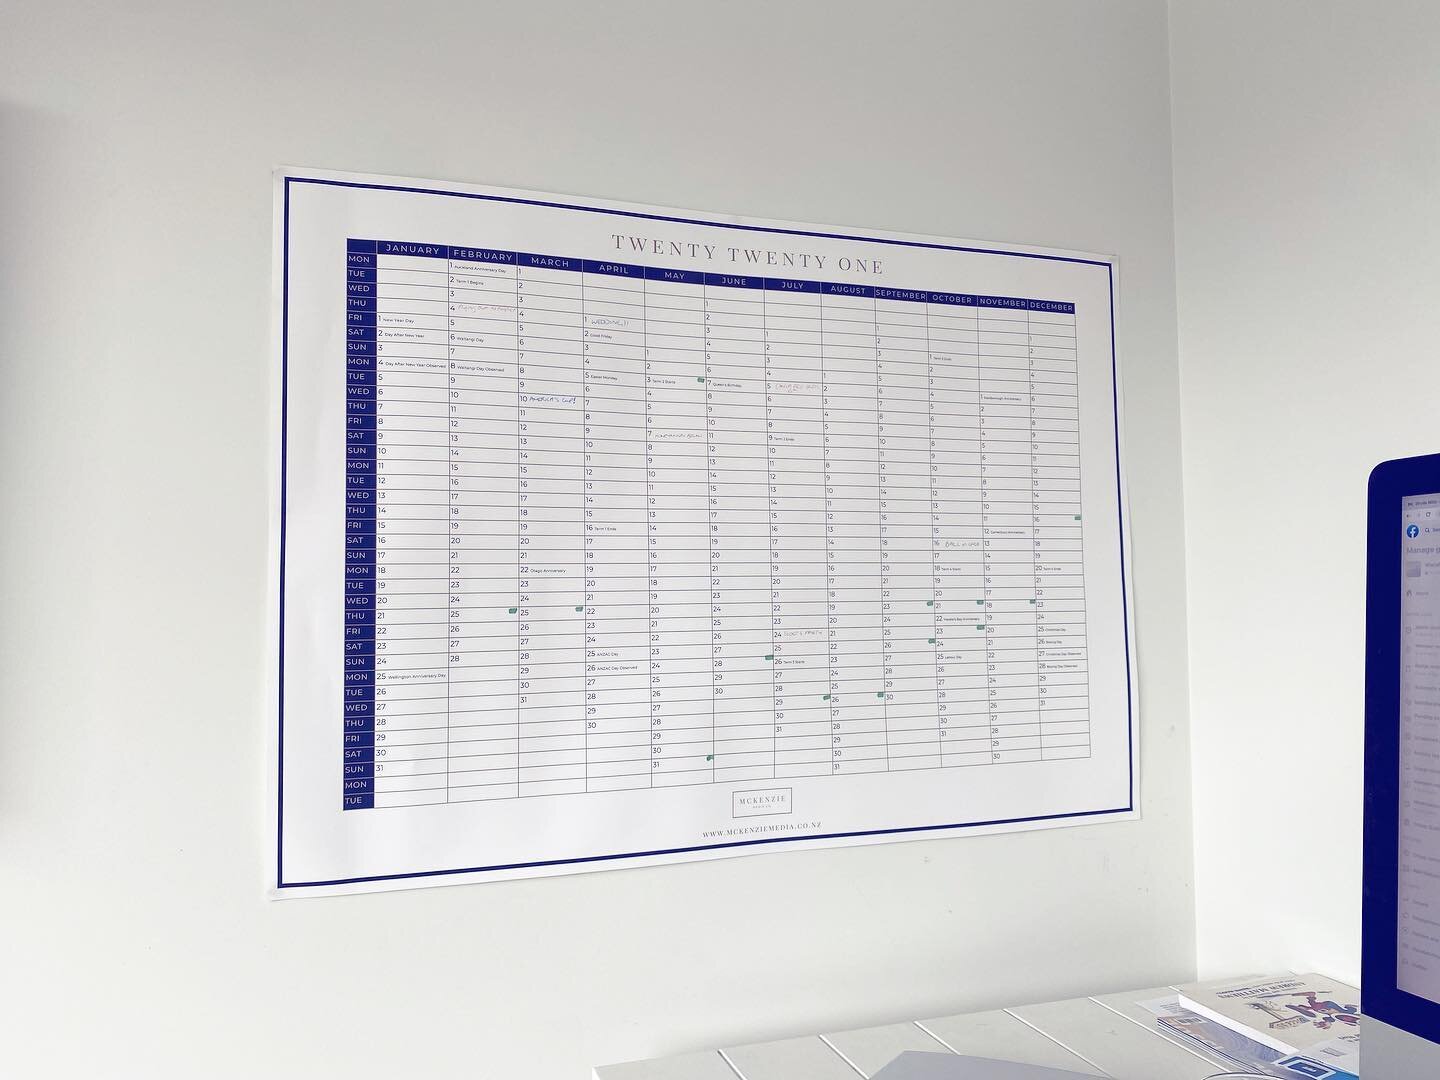 2 0 2 2 wall planner designing time! We get so many comments on our beautiful wall planners and these are such a great visual to have in your office. DM us if you&rsquo;re interested in buying one! @heartlanddesignprint Wanaka printed this one, didn&